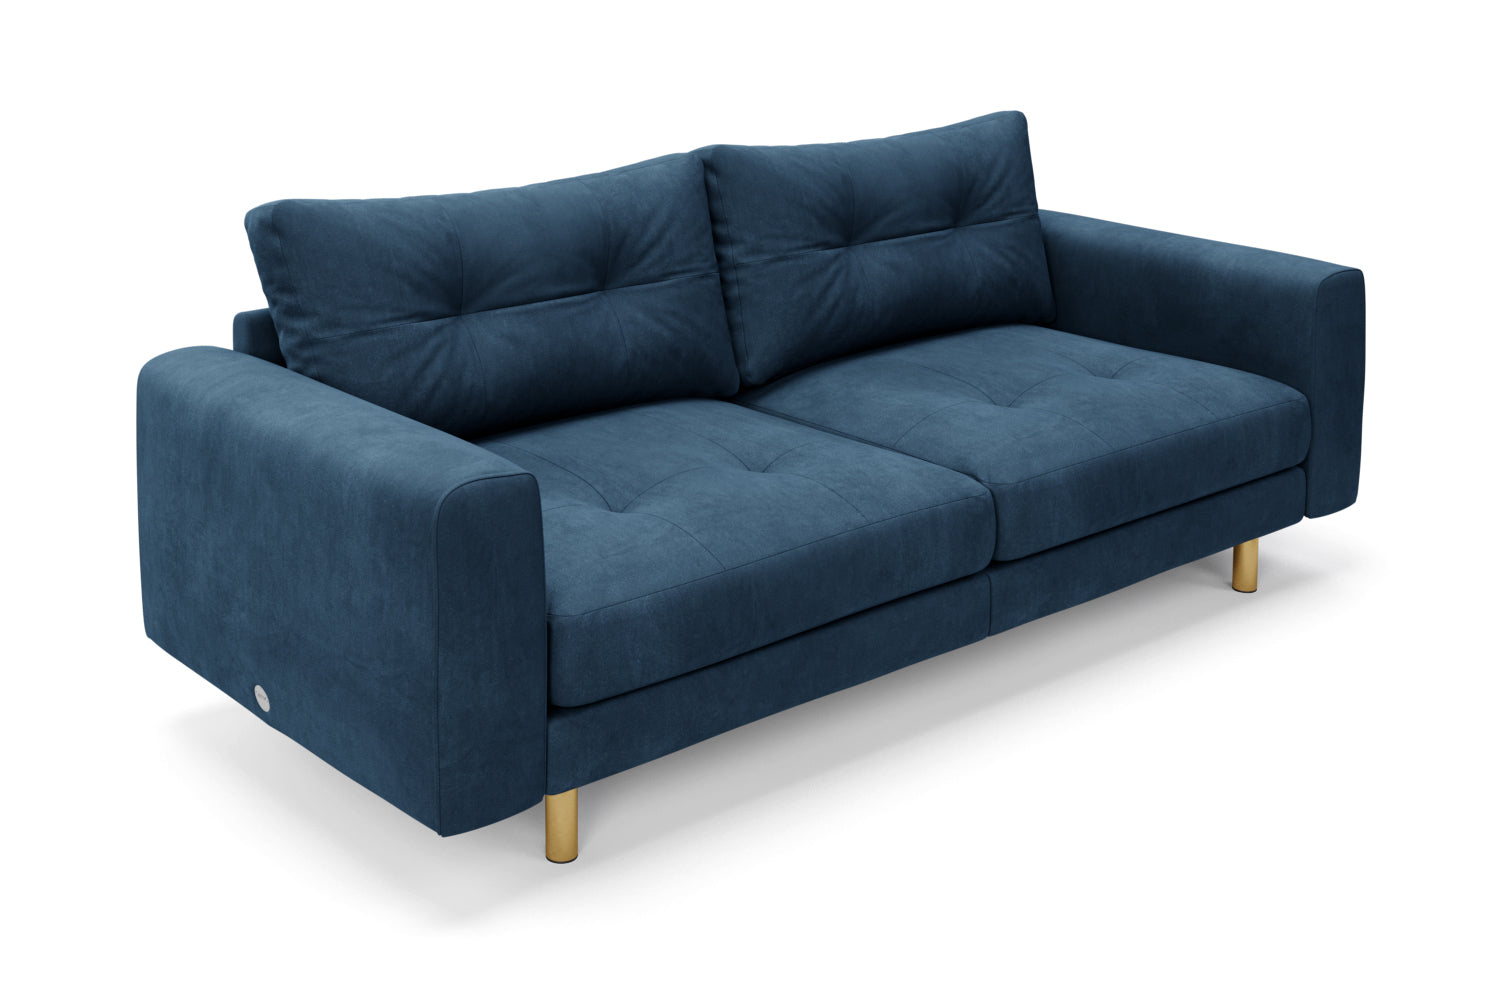 SNUG | The Big Chill 3 Seater Sofa Blind Button Back and Seat Cushions in Blue Steel